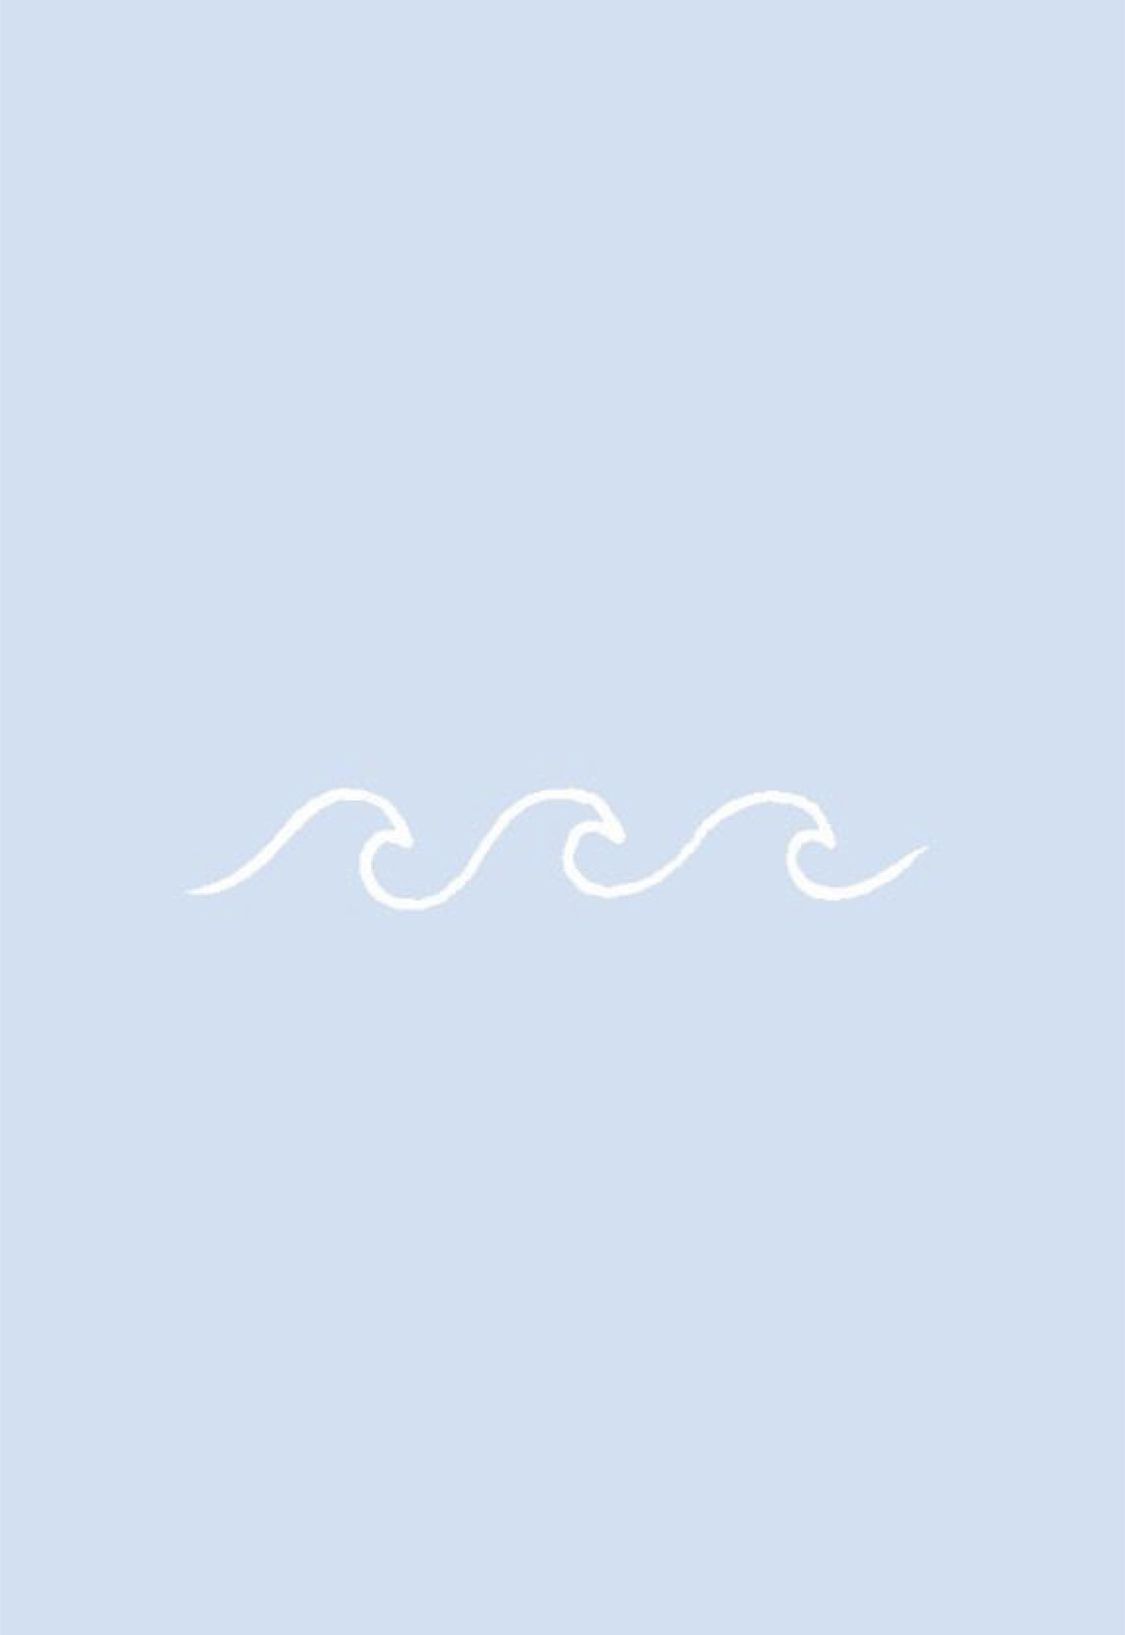 Cute blue VSCO wave background for iPhone. iPhone background